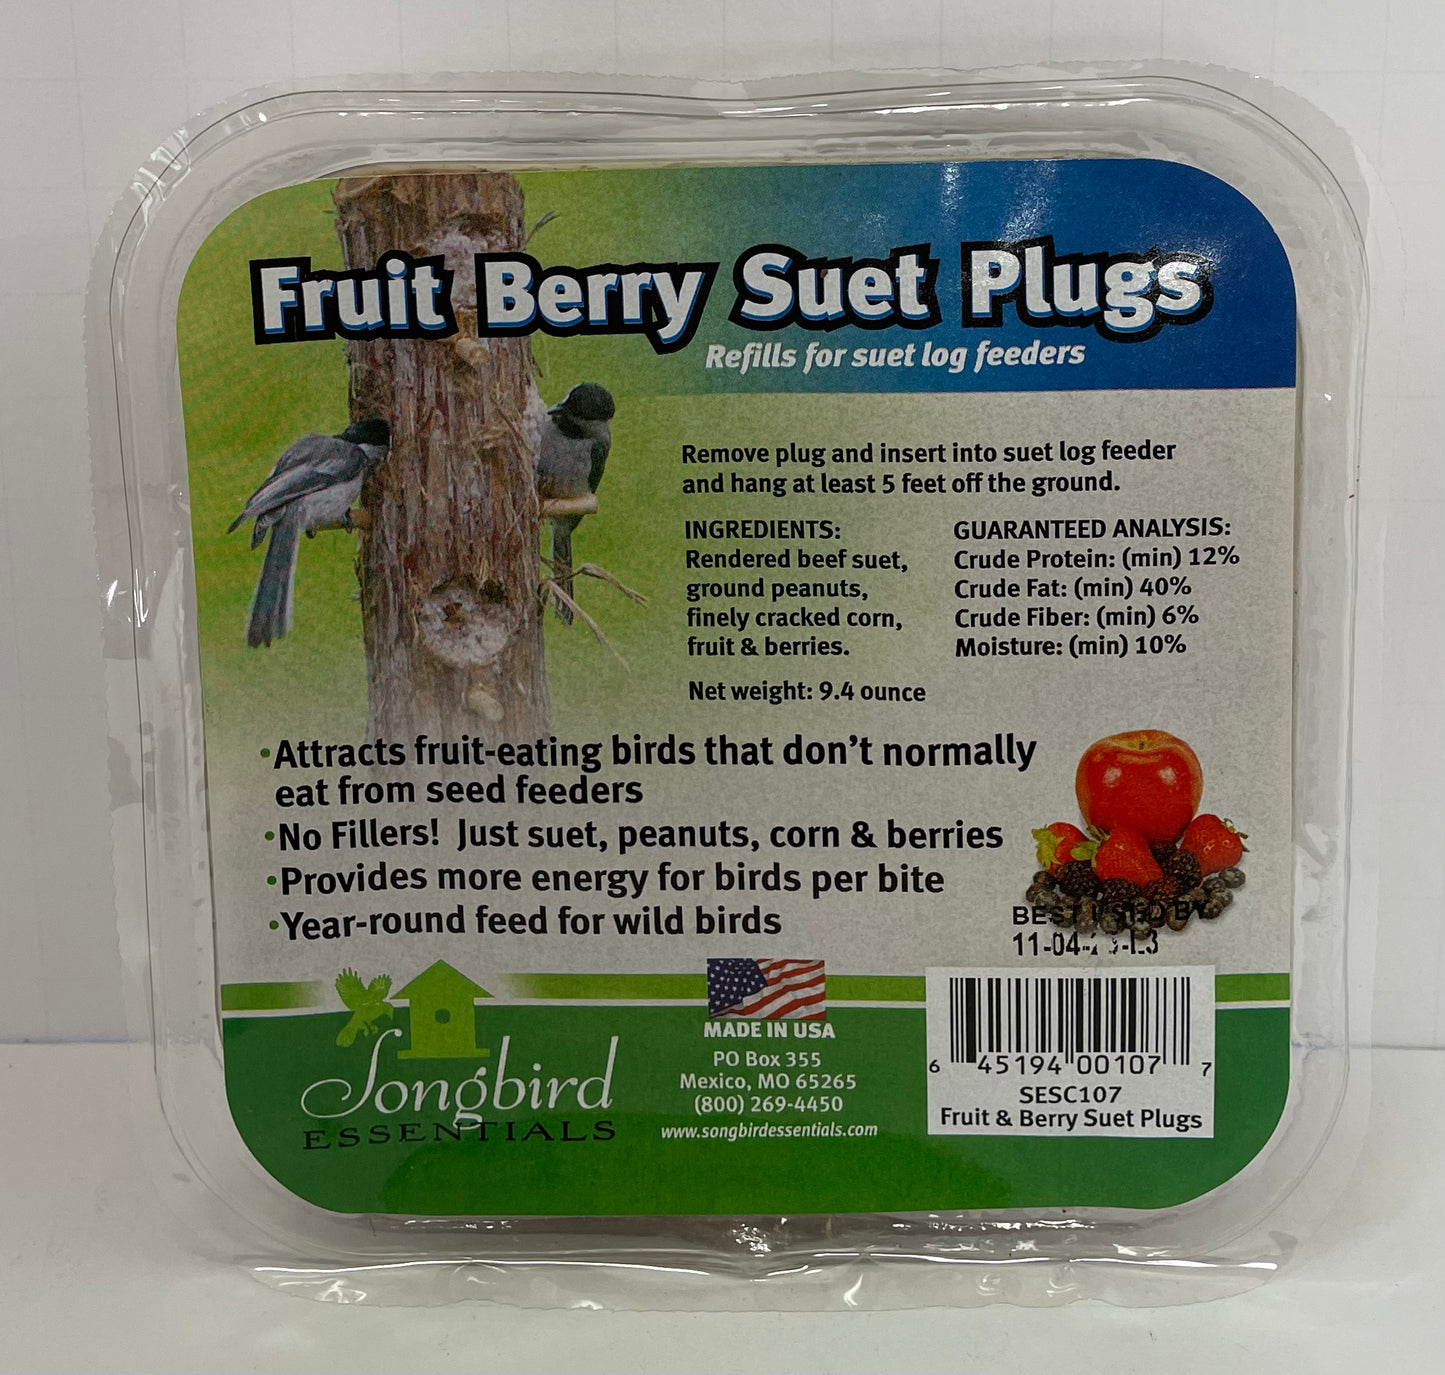 Fruit and Berry Suet Plugs